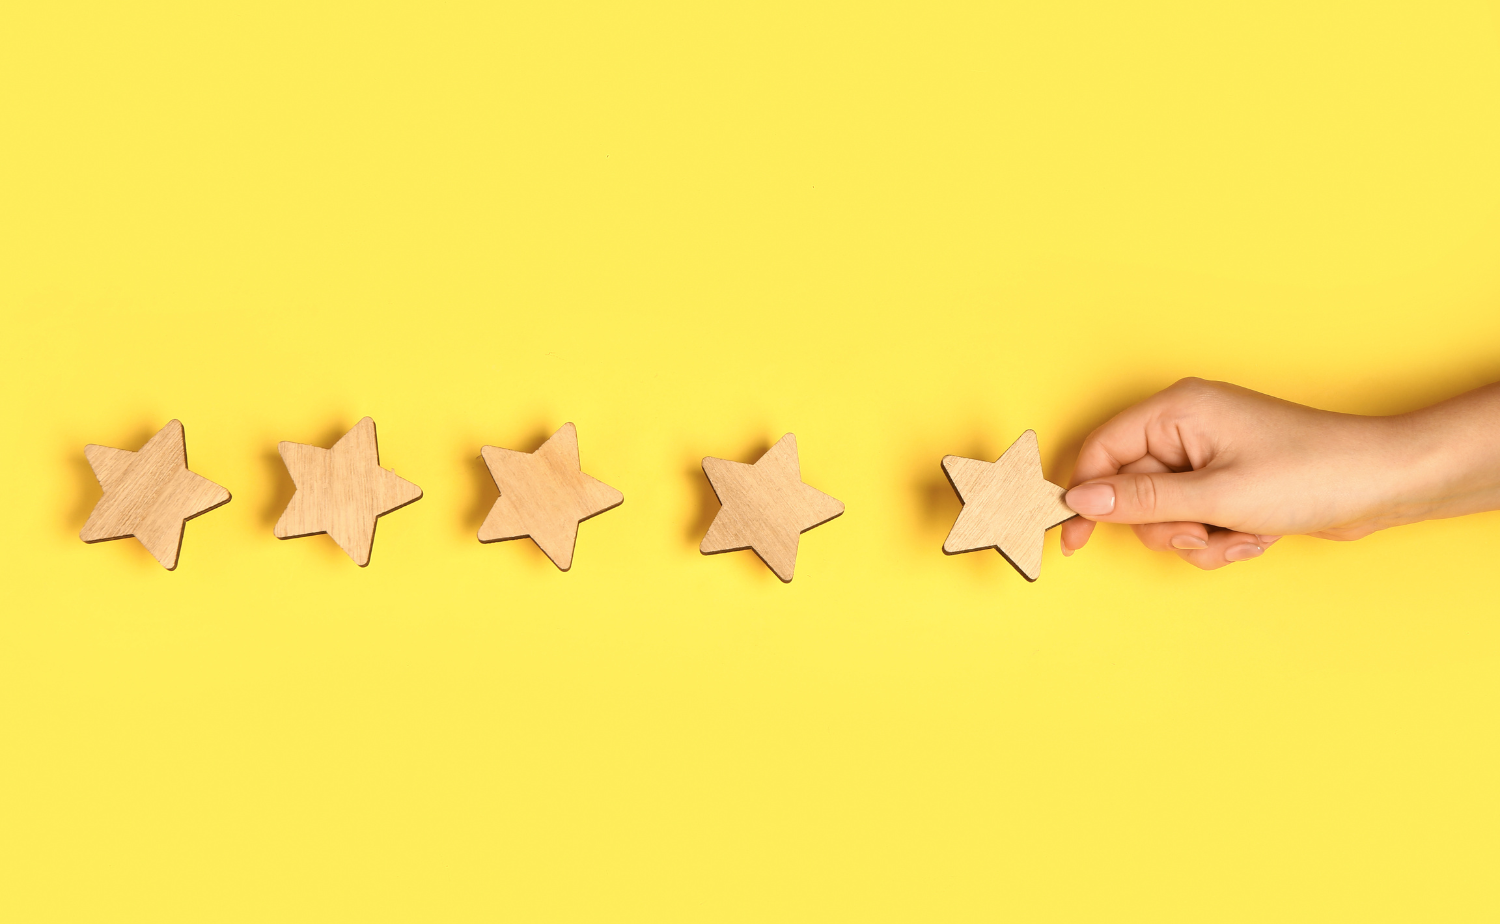 A hand places a wooden star among a row of four other stars on a bright yellow background, representing the concept of rating, review, or achieving a five-star quality.